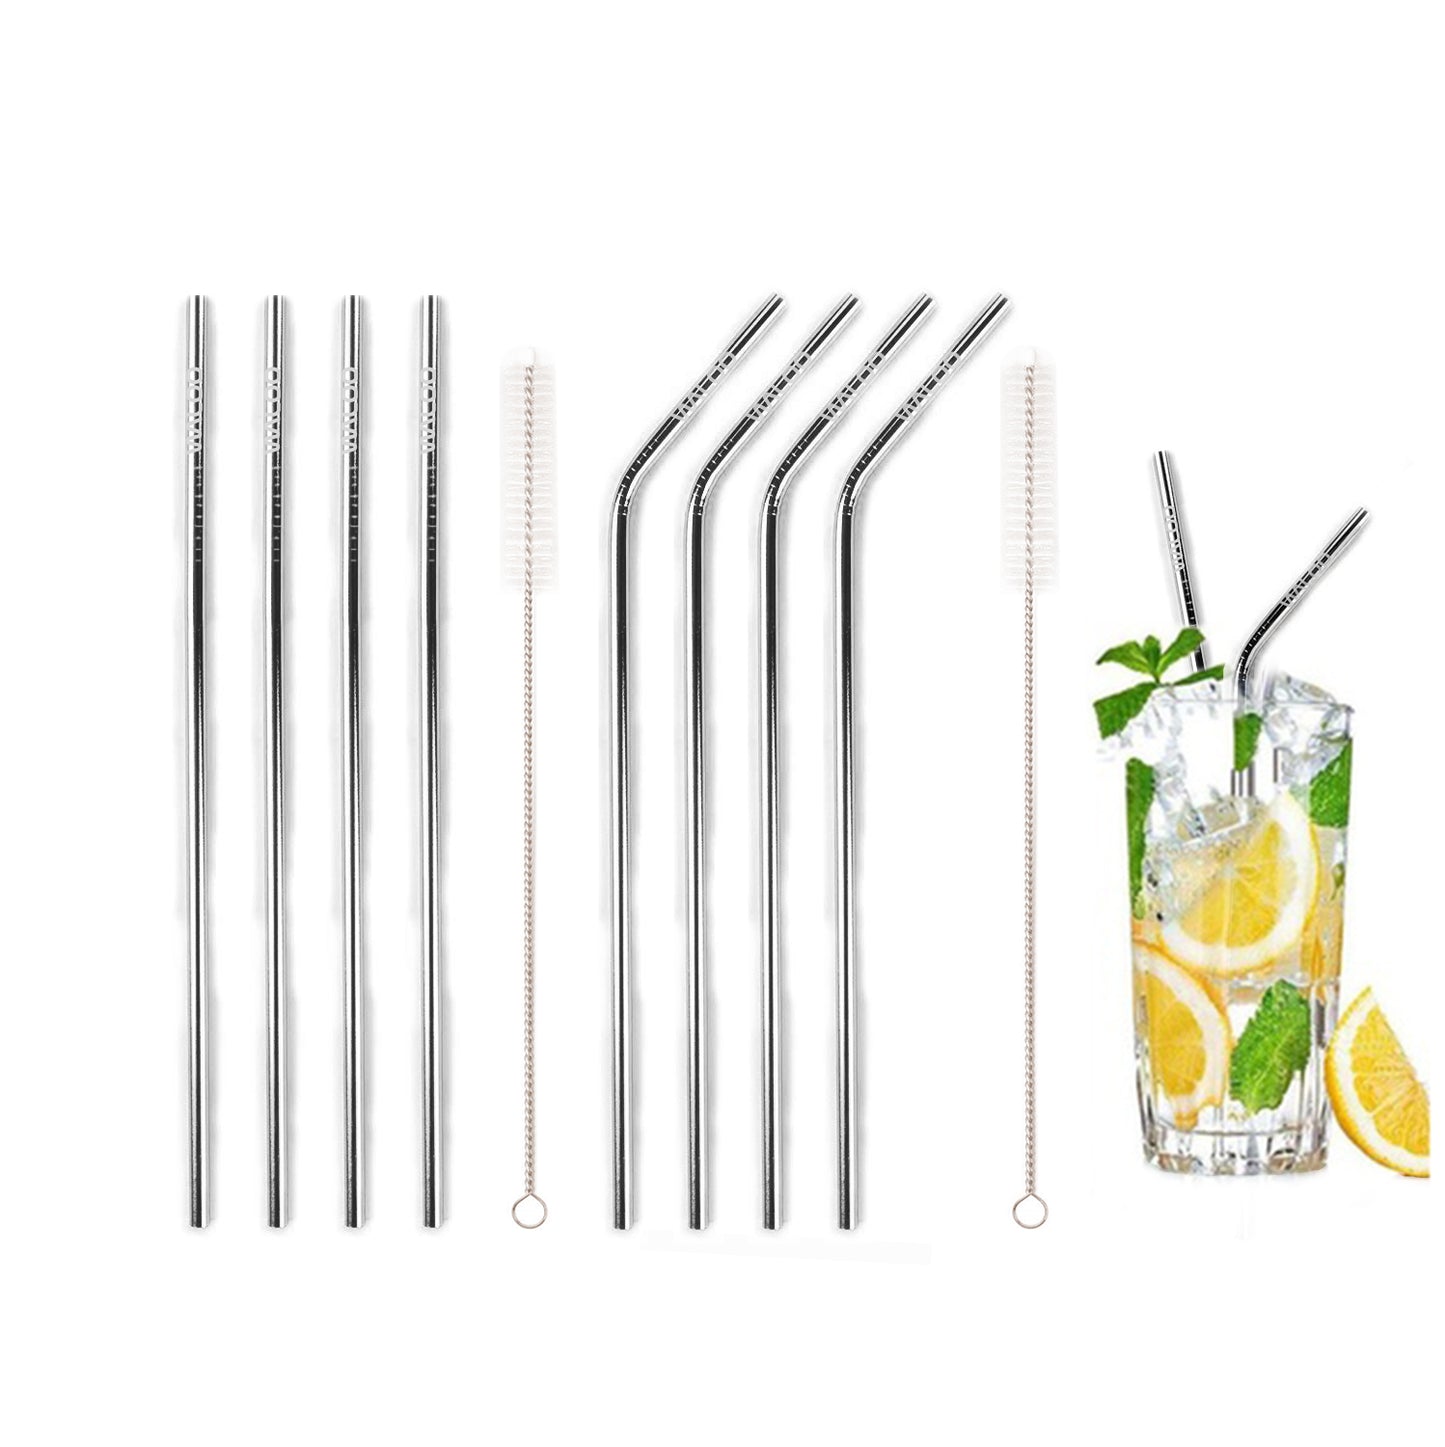 Silver Stainless Steel Drinking Straws (4 Pack)